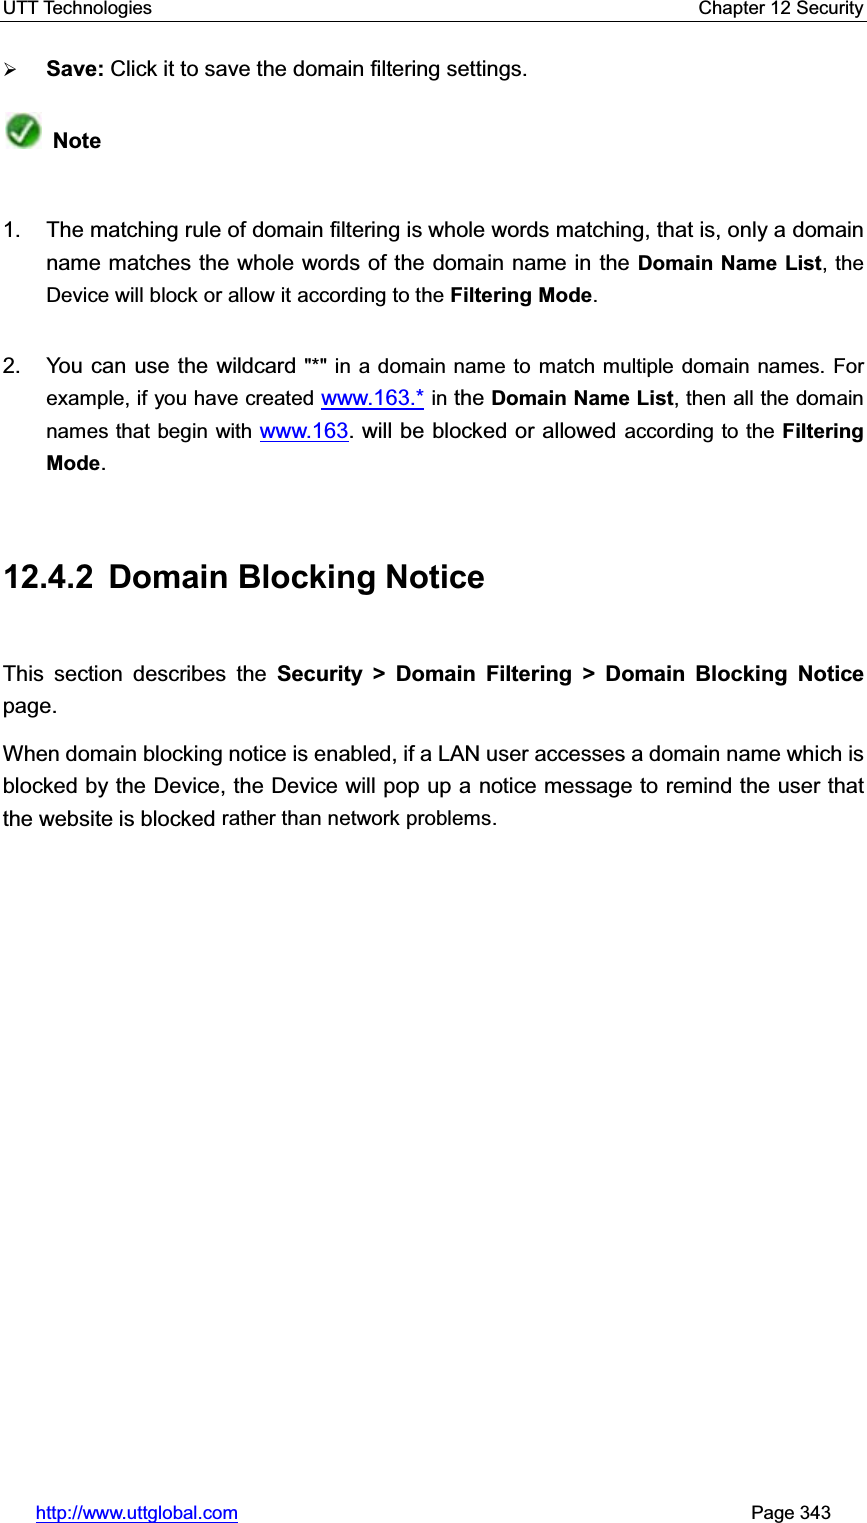 UTT Technologies    Chapter 12 Security   http://www.uttglobal.com                                                       Page 343 ¾Save: Click it to save the domain filtering settings.Note1.  The matching rule of domain filtering is whole words matching, that is, only a domain name matches the whole words of the domain name in the Domain Name List, the Device will block or allow it according to the Filtering Mode.2.  You can use the wildcard &quot;*&quot; in a domain name to match multiple domain names. For example, if you have created www.163.* in the Domain Name List, then all the domain names that begin with www.163. will be blocked or allowed according to the Filtering Mode.12.4.2 Domain Blocking Notice This section describes the Security &gt; Domain Filtering &gt; Domain Blocking Notice page.  When domain blocking notice is enabled, if a LAN user accesses a domain name which is blocked by the Device, the Device will pop up a notice message to remind the user that the website is blocked rather than network problems.